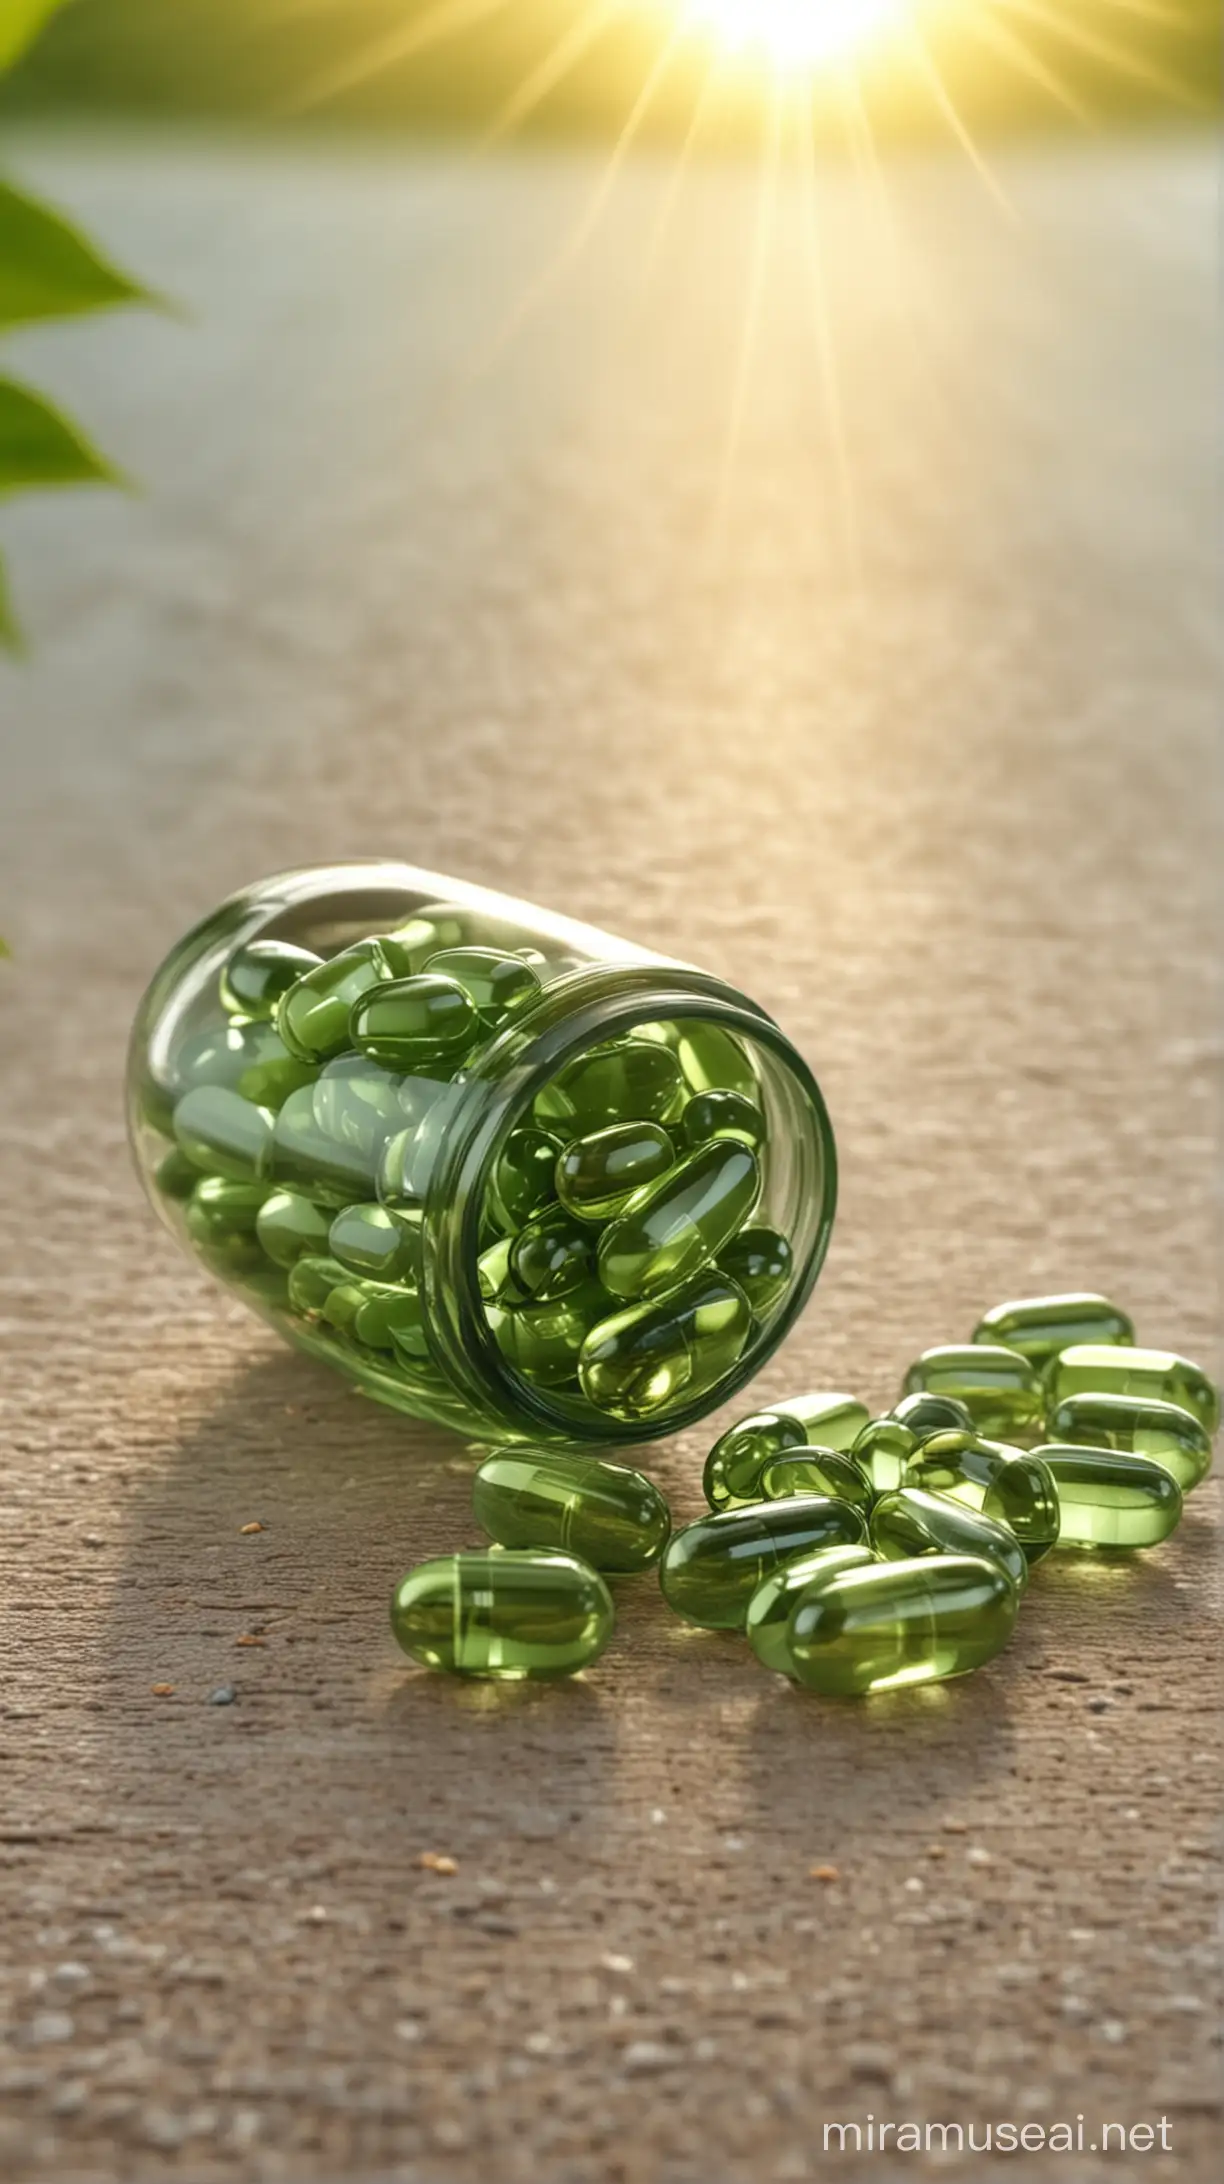 green vitamin e capsule on table , natural background, sun light effect, 4k, HDR, morning time weather

